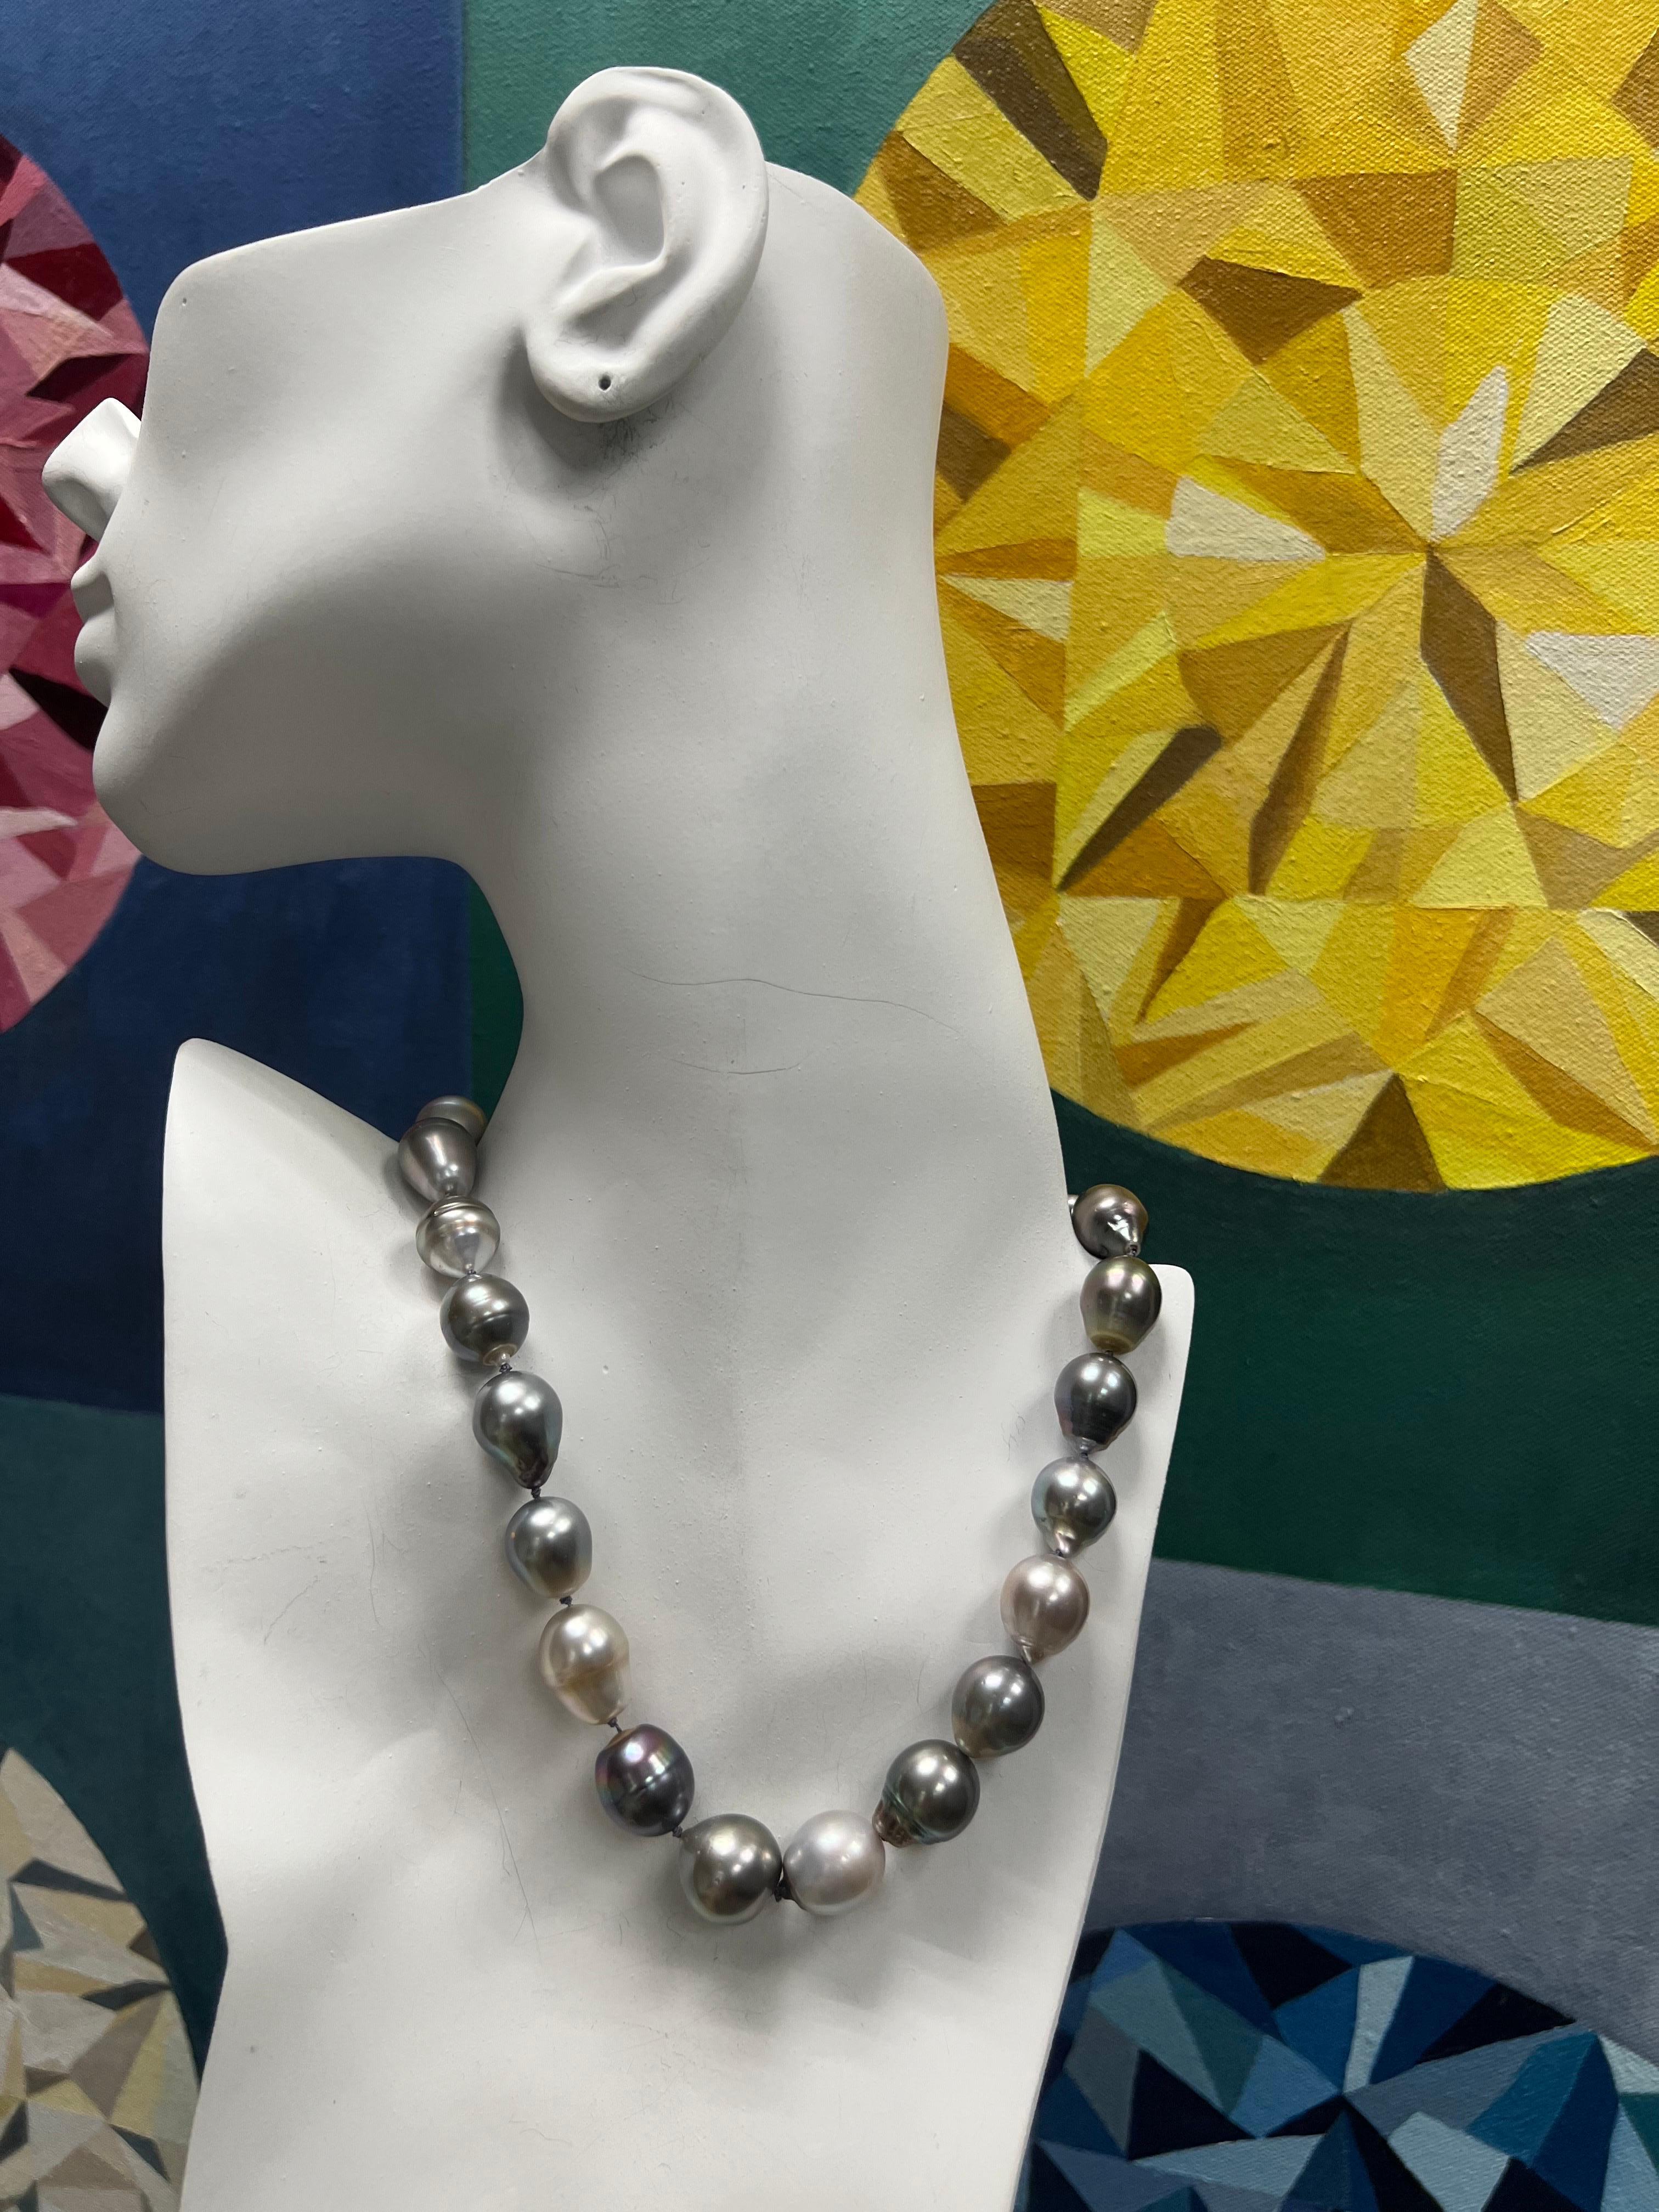 Modern Gold Tahitian Baroque 11-14.5mm Pearl 15.75 Inch Toggle Clasp Necklace

It is set with 23 magnificent larger 11-14.5mm pearls with bold multi colors. Very Good Surface, Radiant High Luster, and Very Thick Nacre. The toggle clasp is 18k Yellow